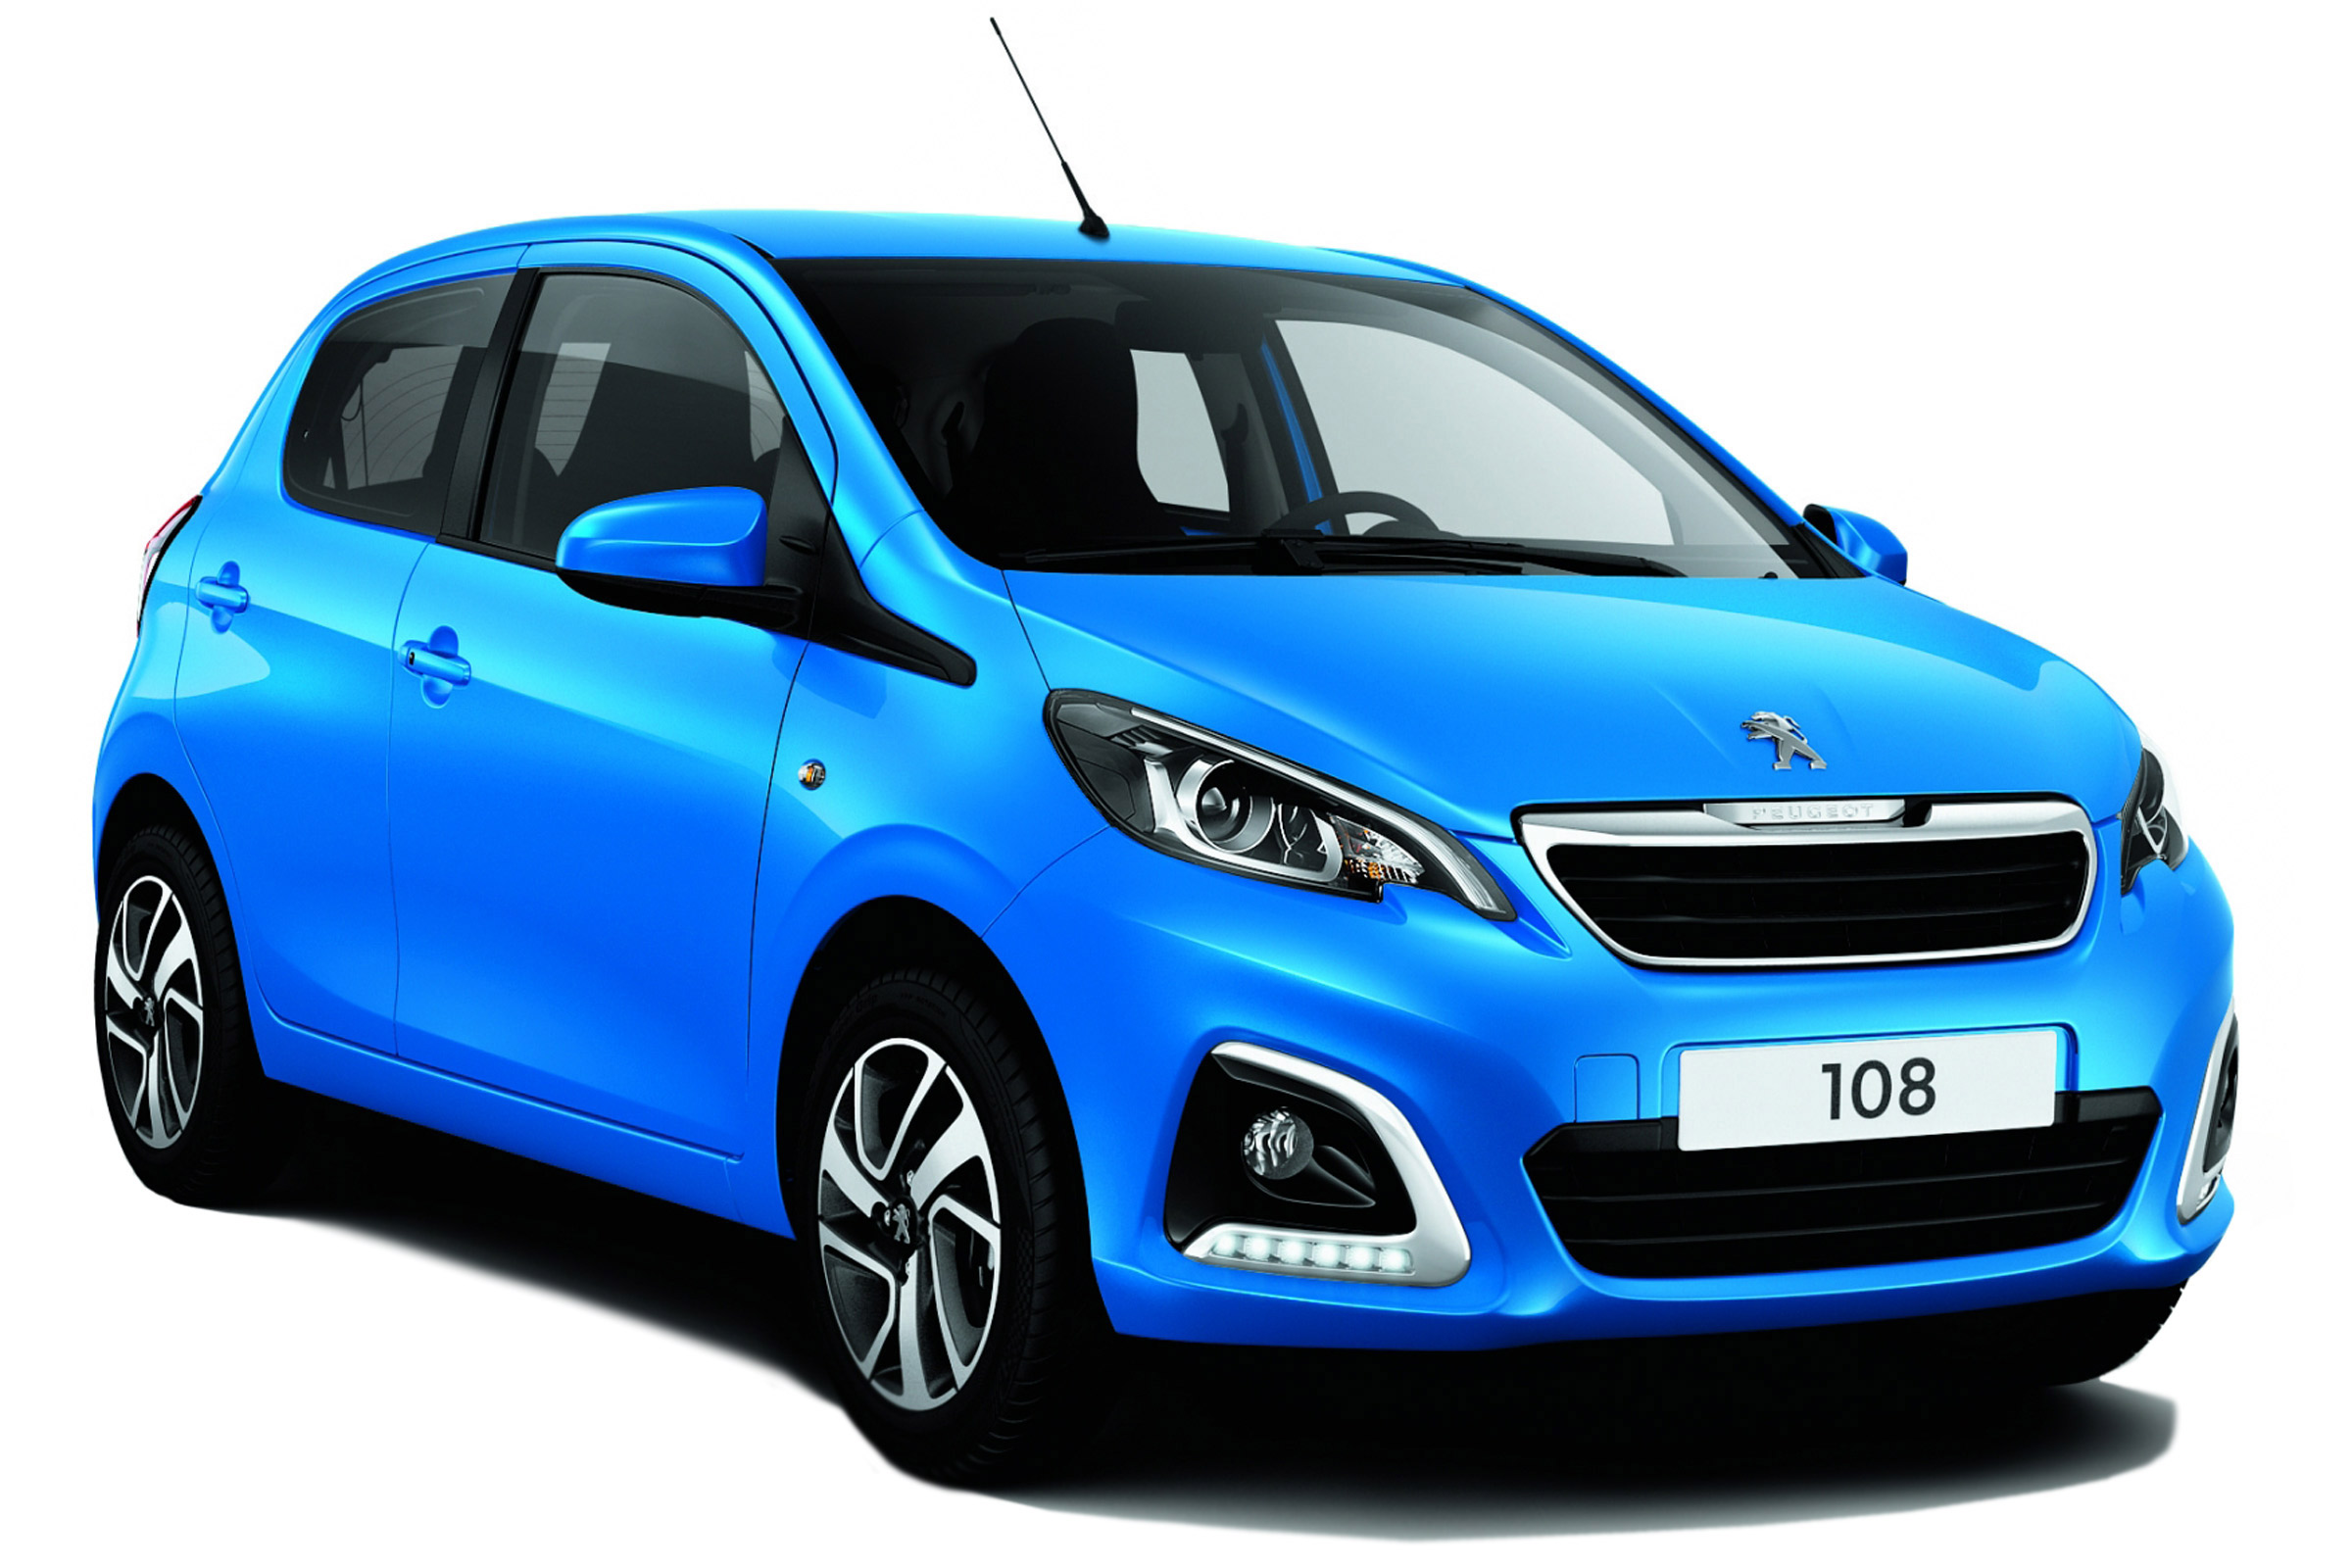 Peugeot 108 Owner Reviews MPG Problems Reliability 2020 Review 